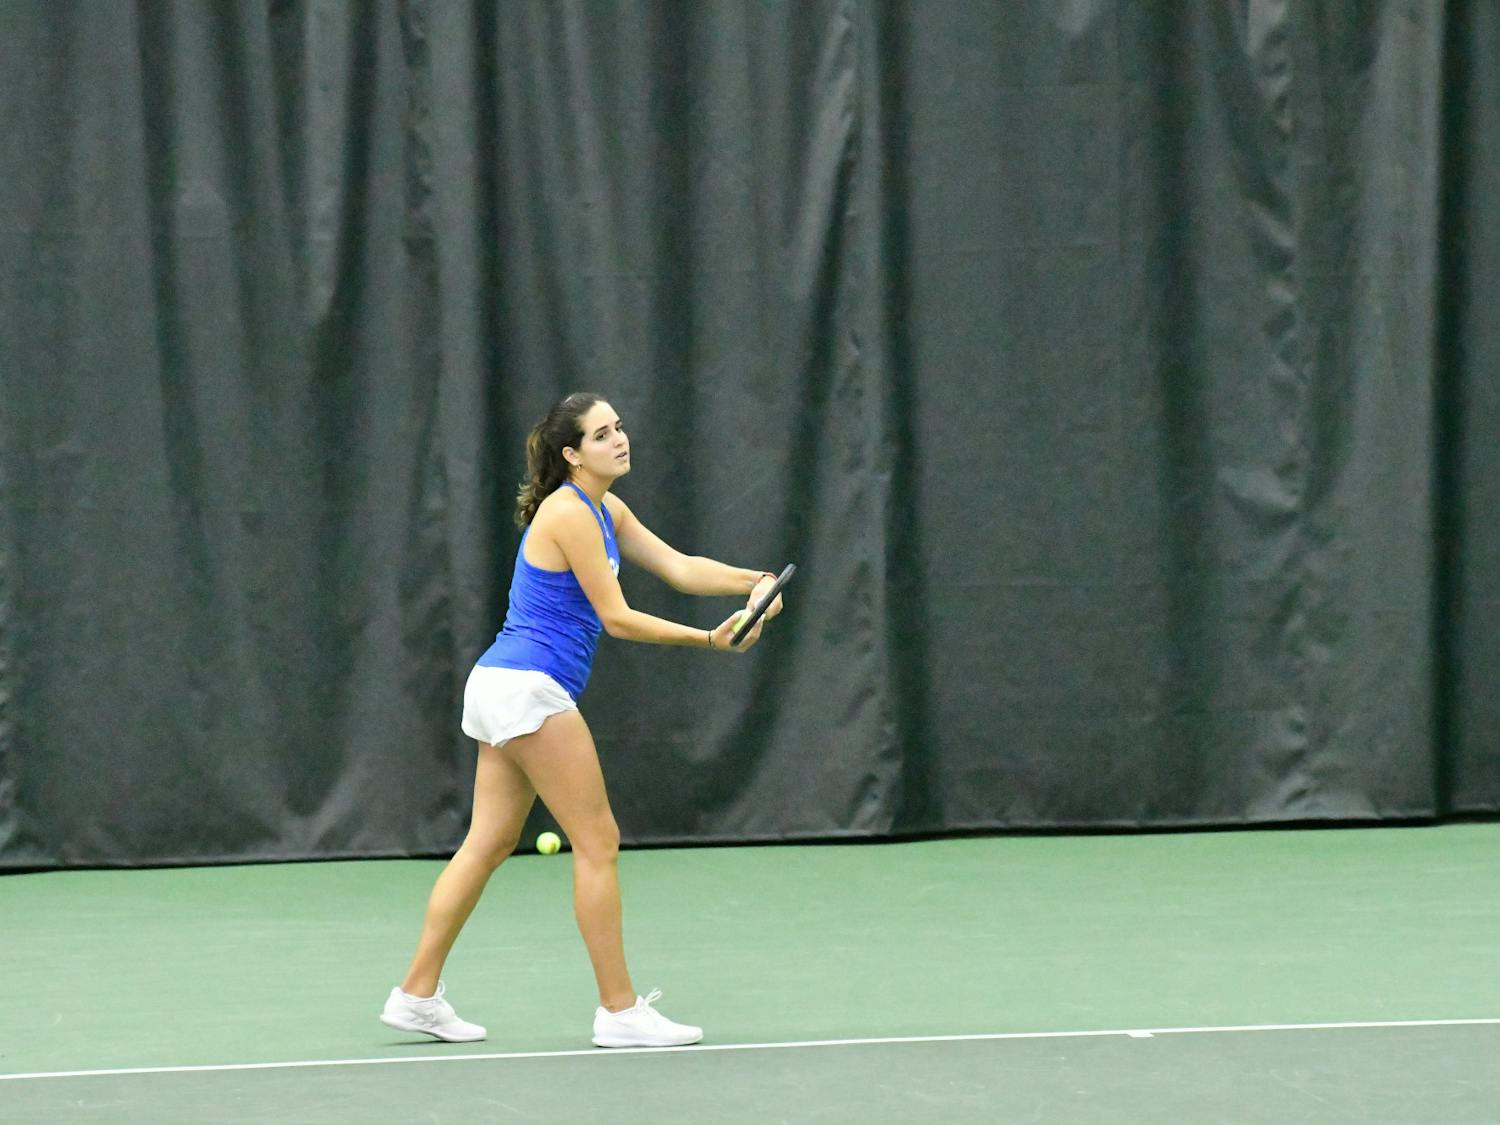 Florida sophomore Emily De Oliveira serves the ball in the Gators' 6-1 victory against the Baylor Bears Sunday, Feb. 5, 2023. Photo by Shelby Hild.